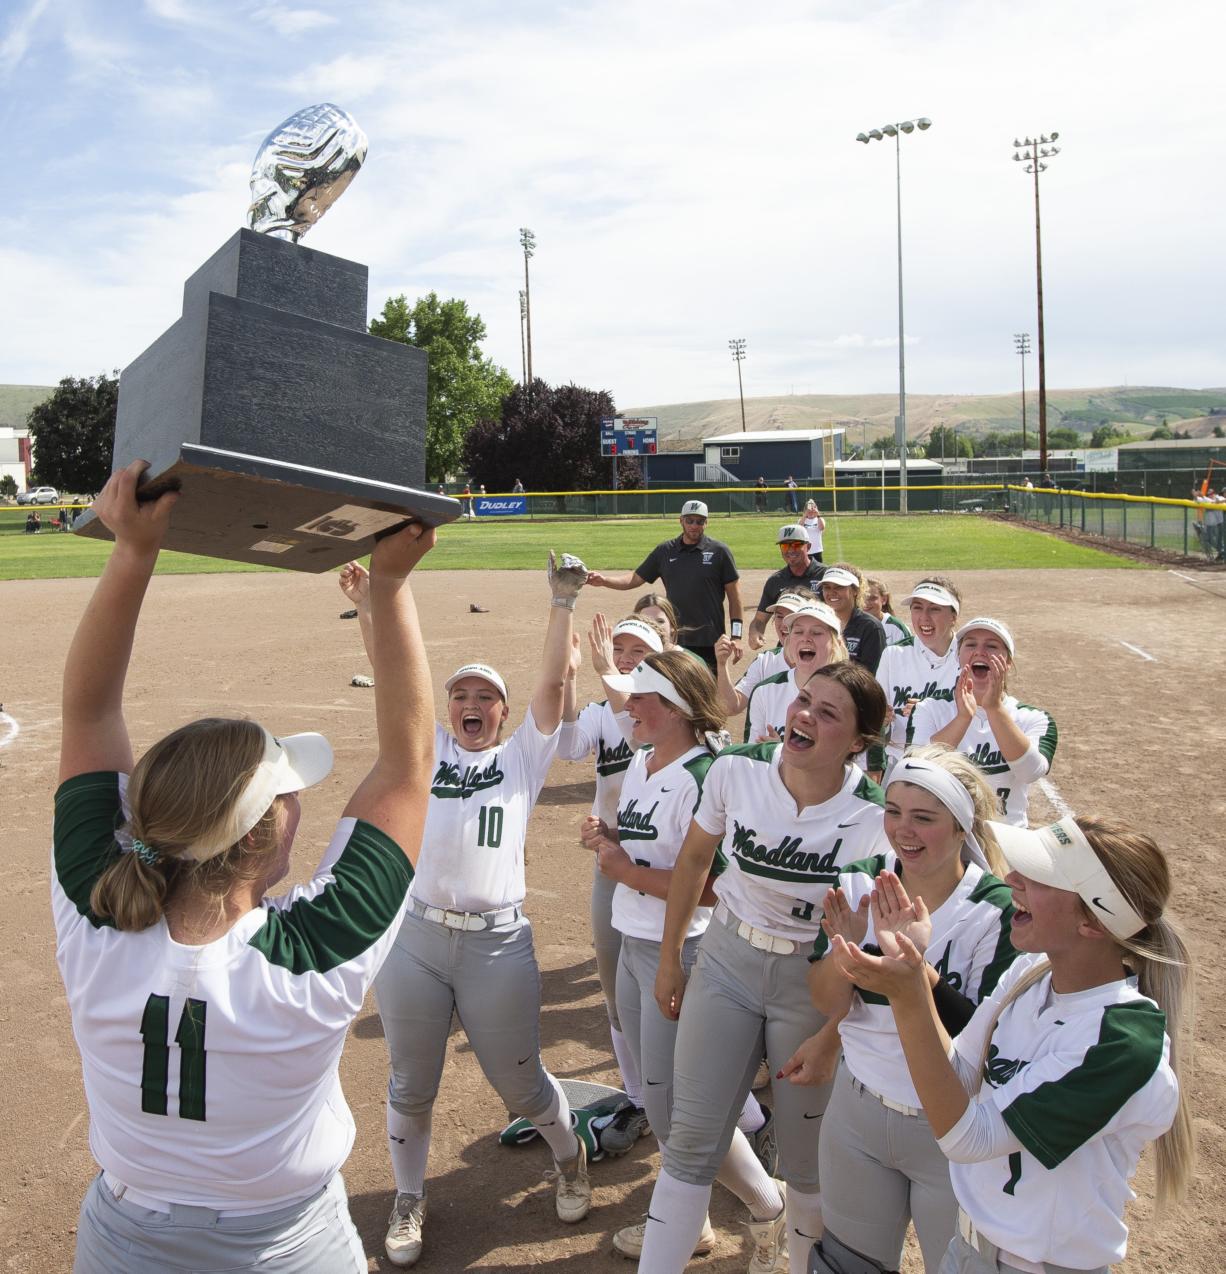 Woodland's Olivia Grey holds up the state championship trophy as her teammates celebrate after a 3-0 victory over W.F. West on Saturday, May 25, 2019 at Carlon Park in Selah, Wash.